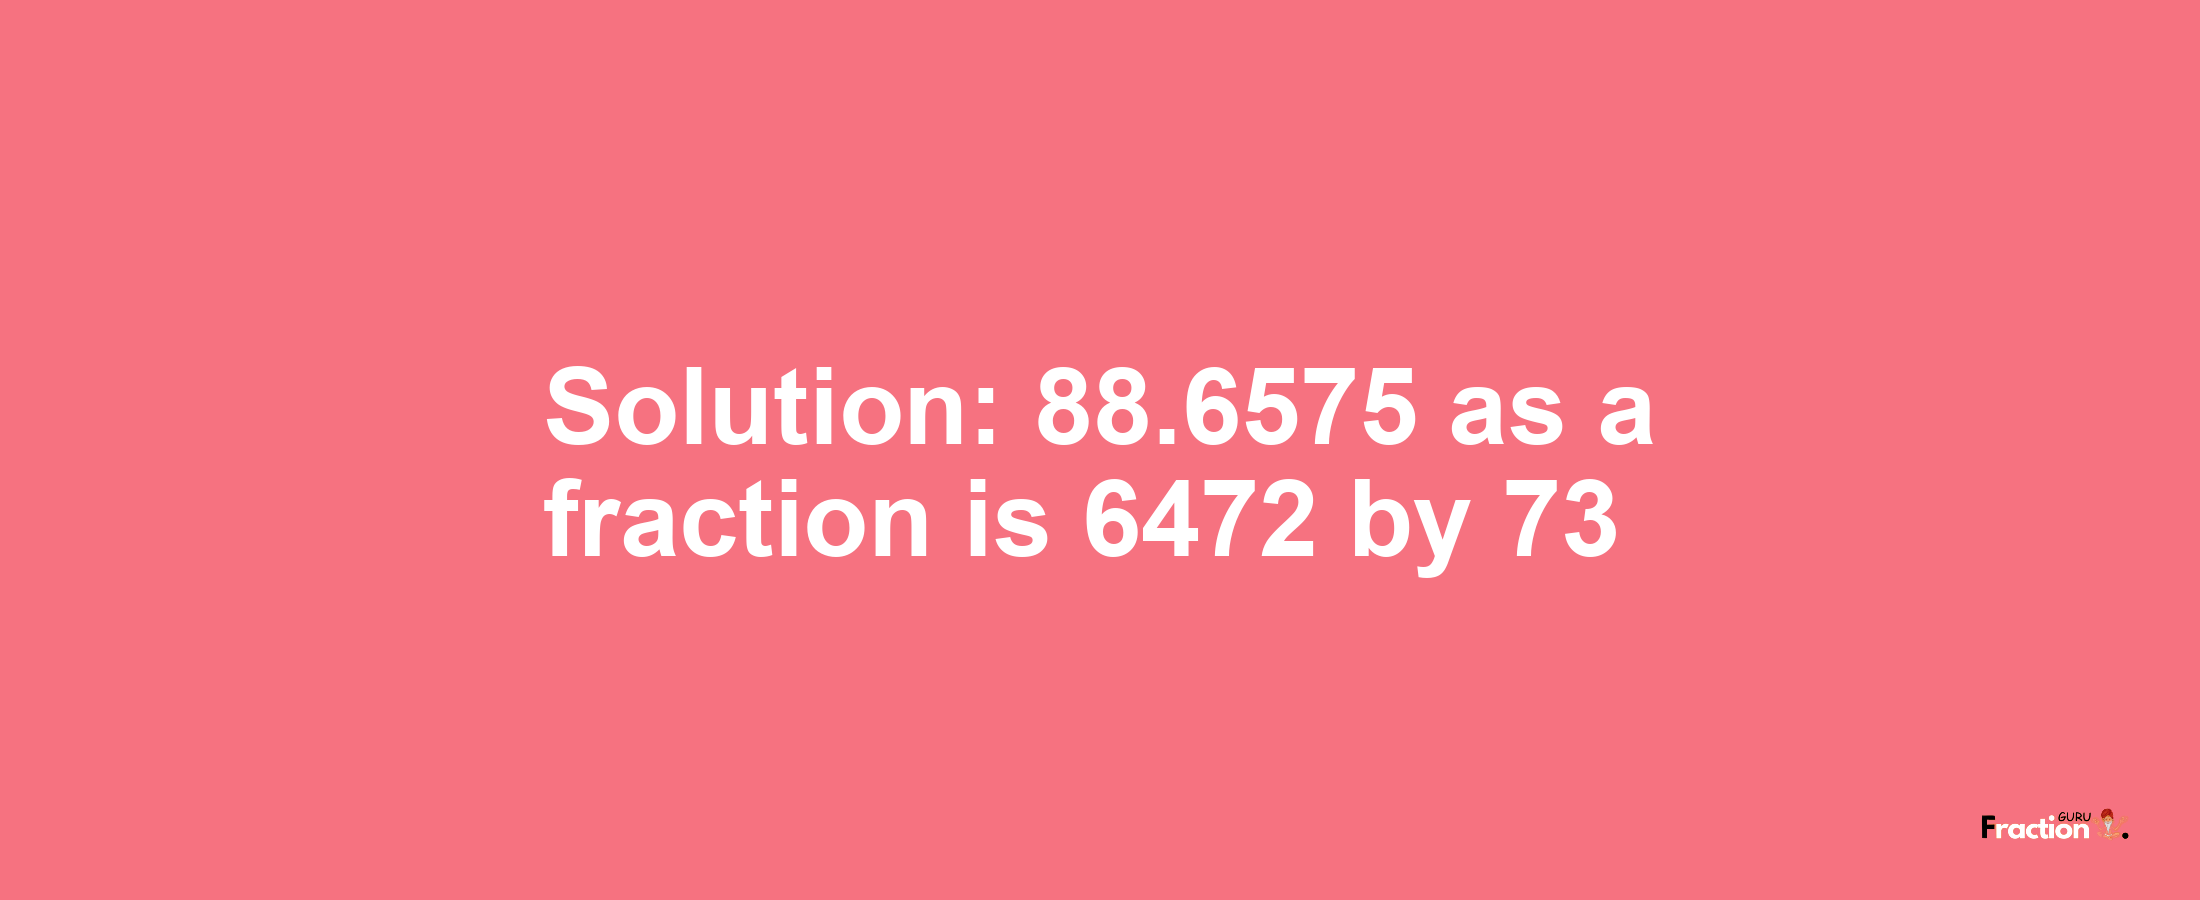 Solution:88.6575 as a fraction is 6472/73